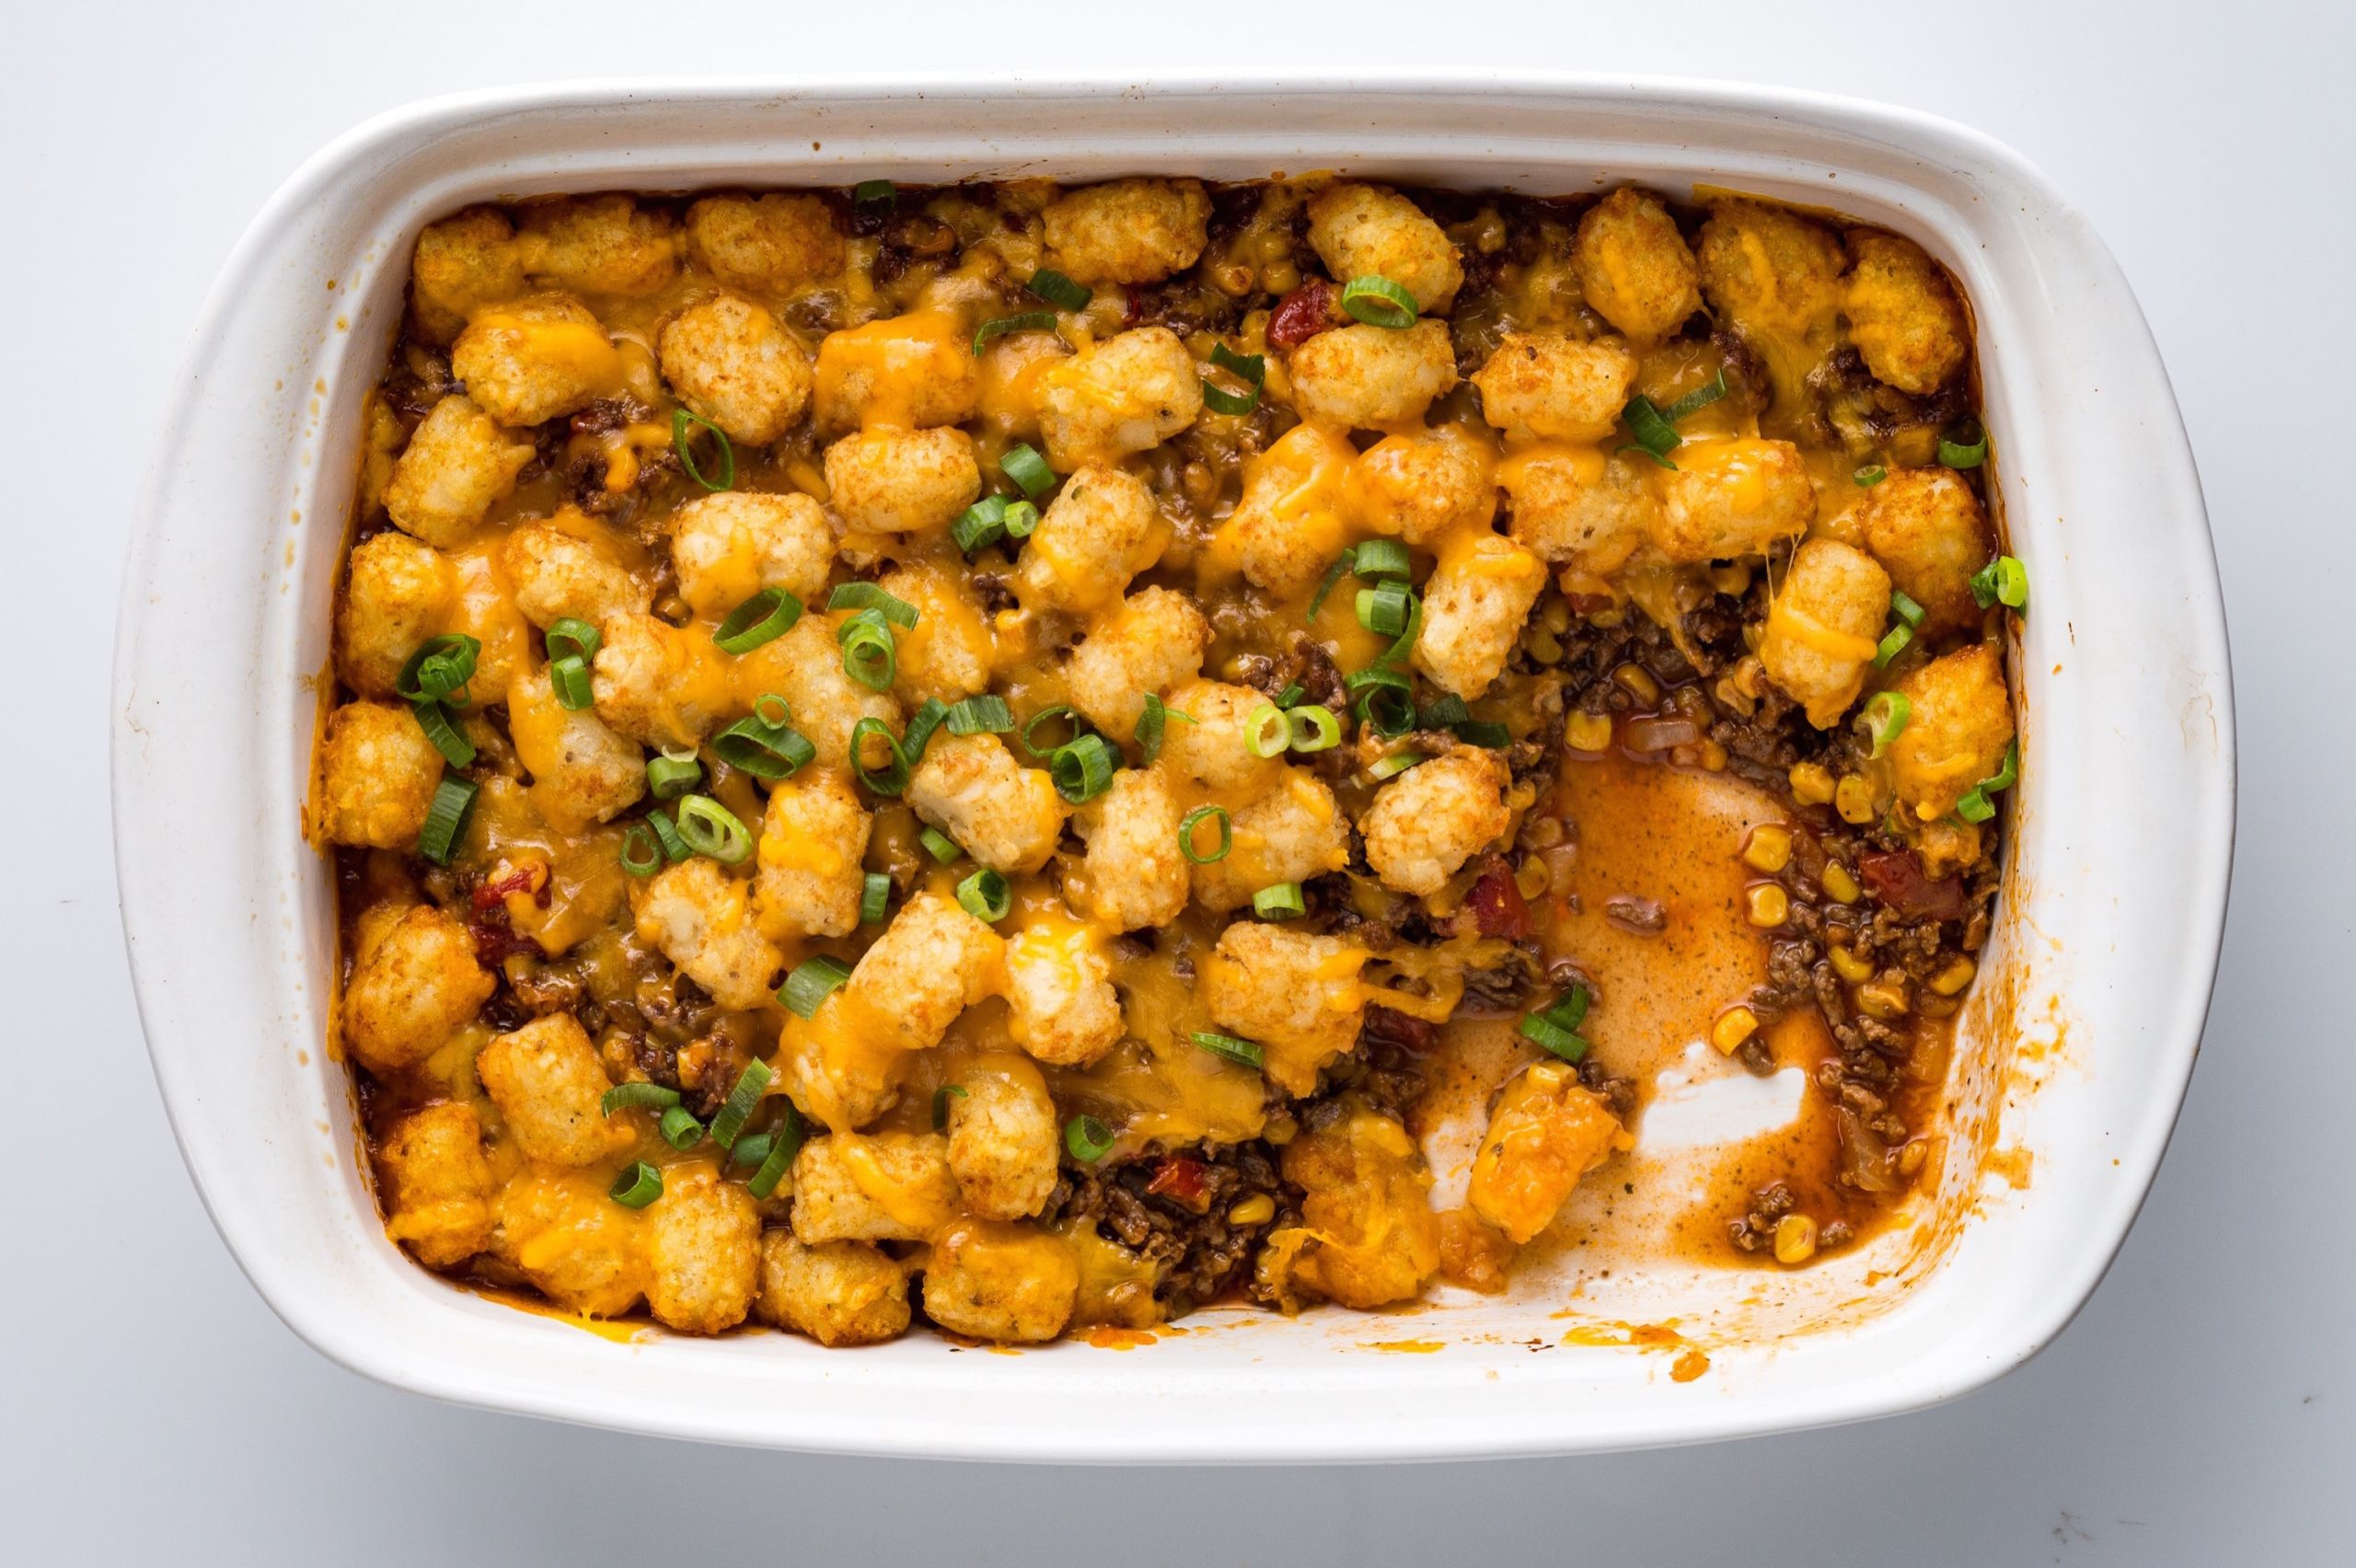 Hamburger Casserole With Tater Tots
 Barbecue Beef Tater Tot Casserole